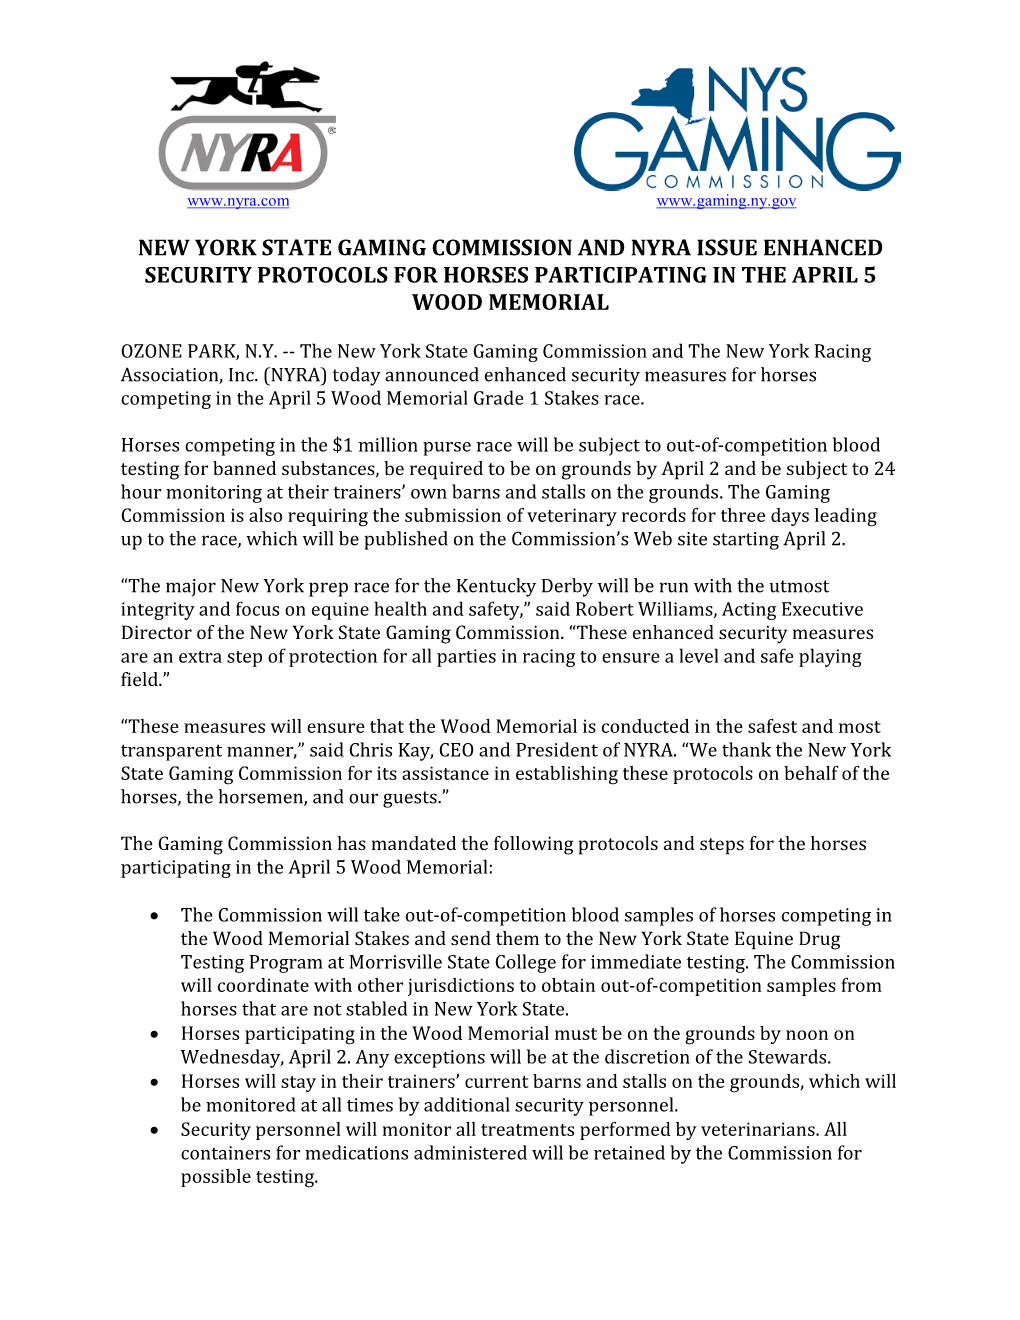 Nyra & Nys Gaming Commission Announce Enhanced